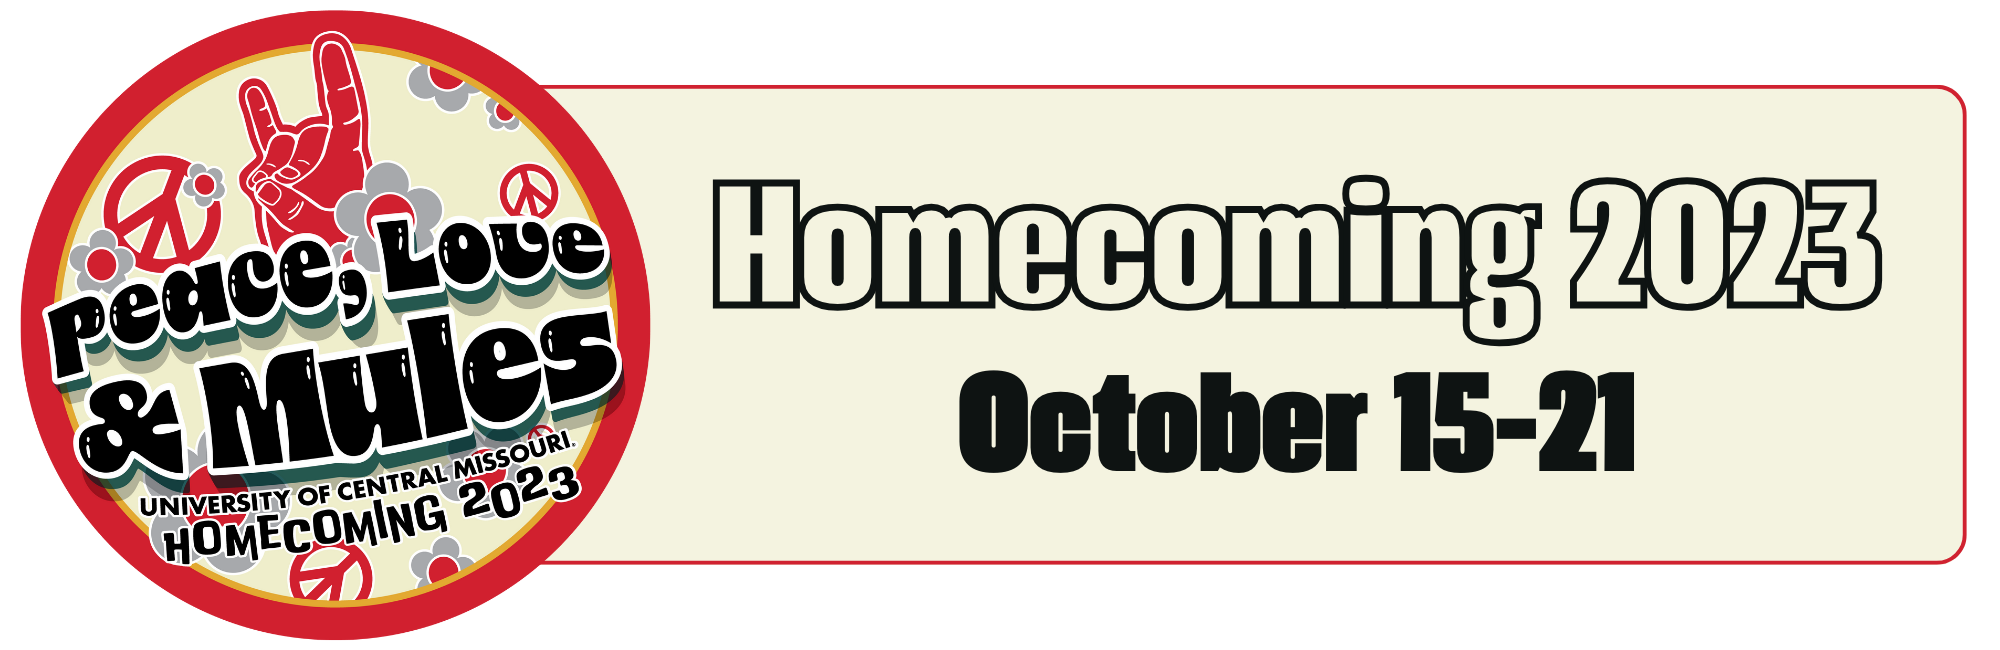 Homecoming 2023 Button and dates, October 15-21